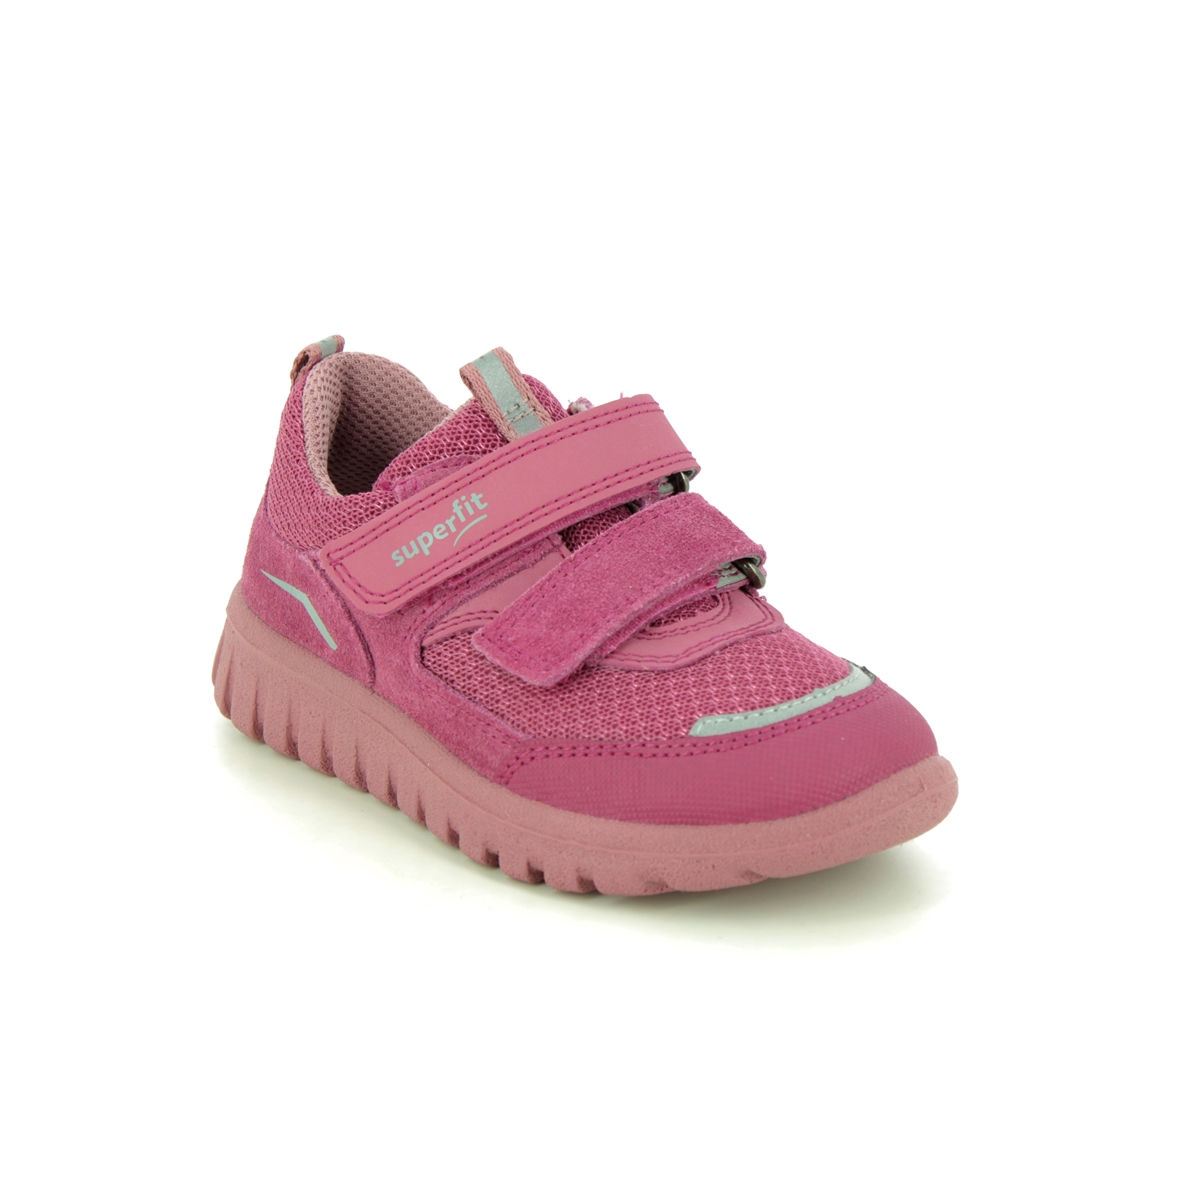 Superfit Sport7 Mini 2V Hot Pink Kids Girls Trainers 1006194-5520 In Size 23 In Plain Hot Pink For kids